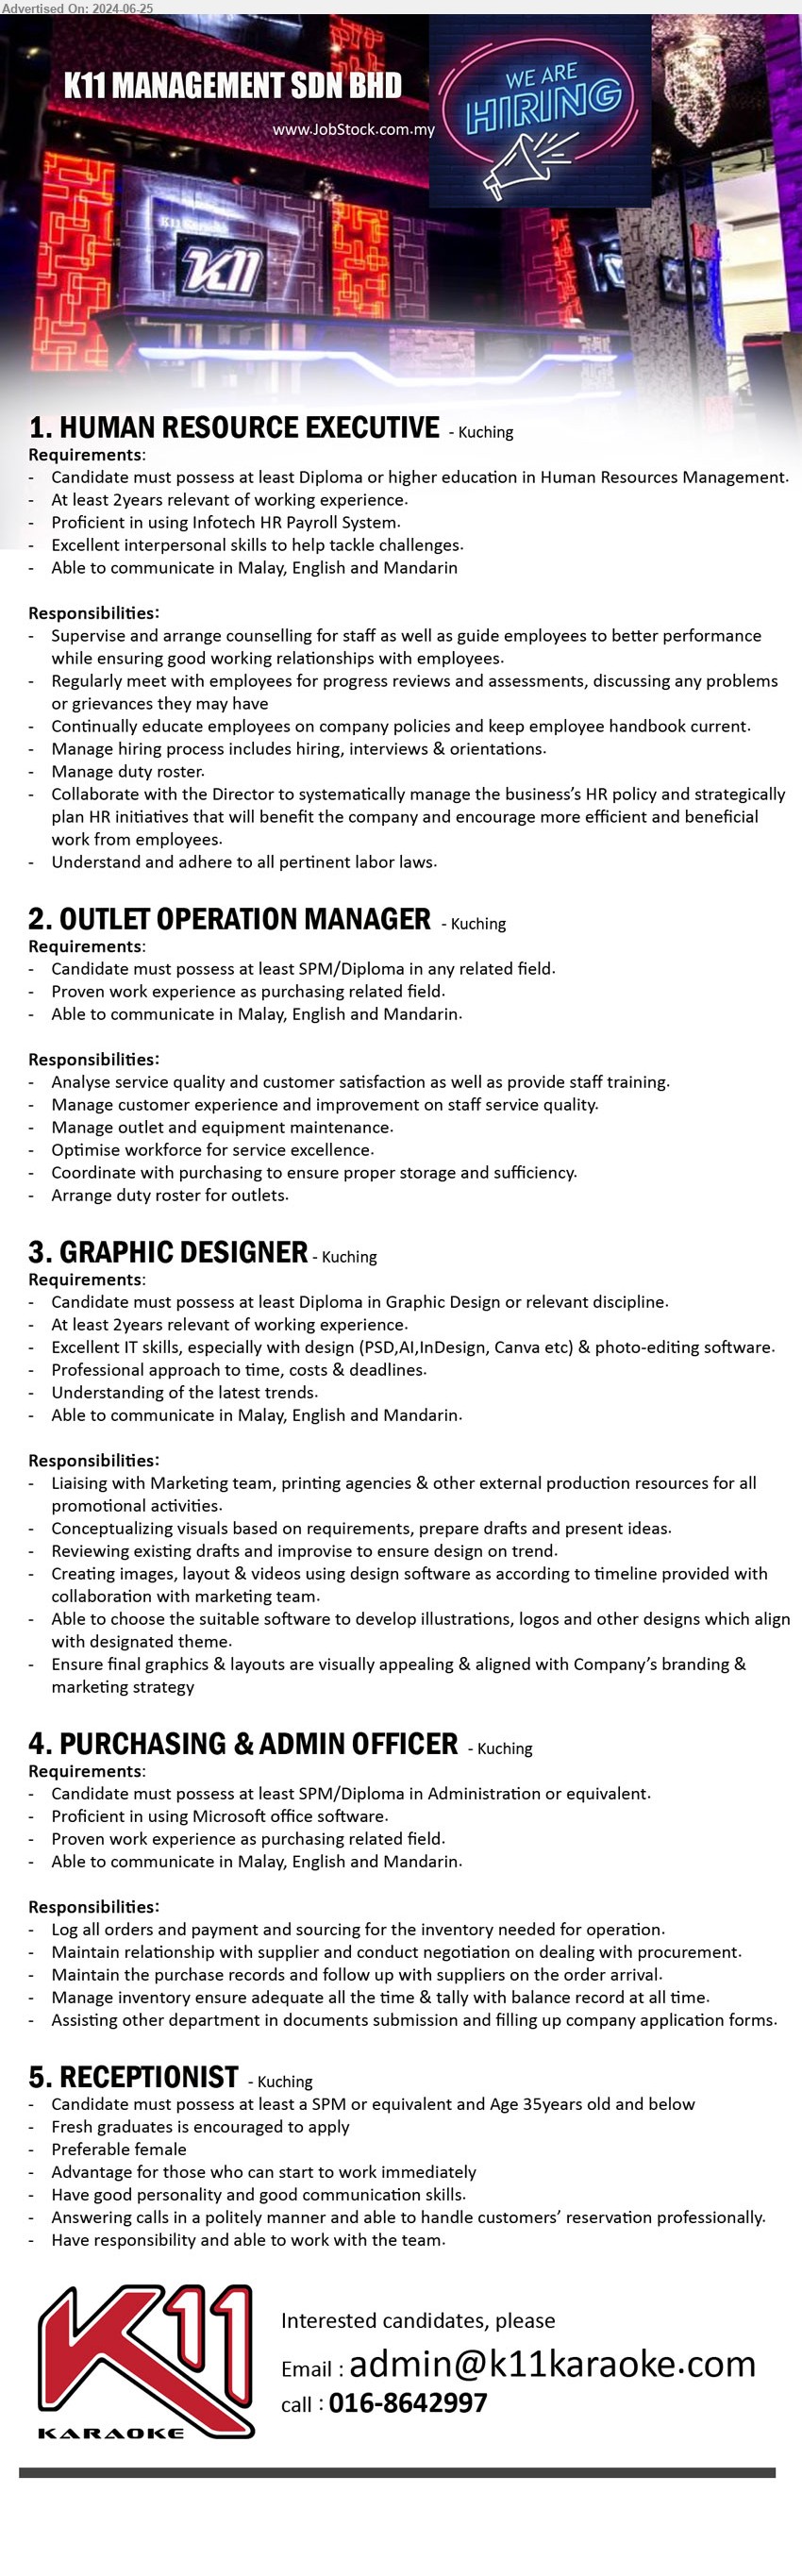 K11 MANAGEMENT SDN BHD - 1. HUMAN RESOURCE EXECUTIVE (Kuching), Diploma or higher education in Human Resources Management,...
2. OUTLET OPERATION MANAGER (Kuching), SPM/Diploma, Analyse service quality and customer satisfaction as well as provide staff training,...
3. GRAPHIC DESIGNER  (Kuching), Diploma in Graphic Design, 2 yrs. exp., Excellent IT skills, especially with design (PSD,AI,InDesign, Canva etc) & photo-editing software,...
4. PURCHASING & ADMIN OFFICER (Kuching), SPM/Diploma in Administration, Proficient in using Microsoft office software,...
5. RECEPTIONIST  (Kuching), SPM, Fresh graduates is encouraged to apply, Preferable female,...
Call 016-8642997 / Email resume to ...